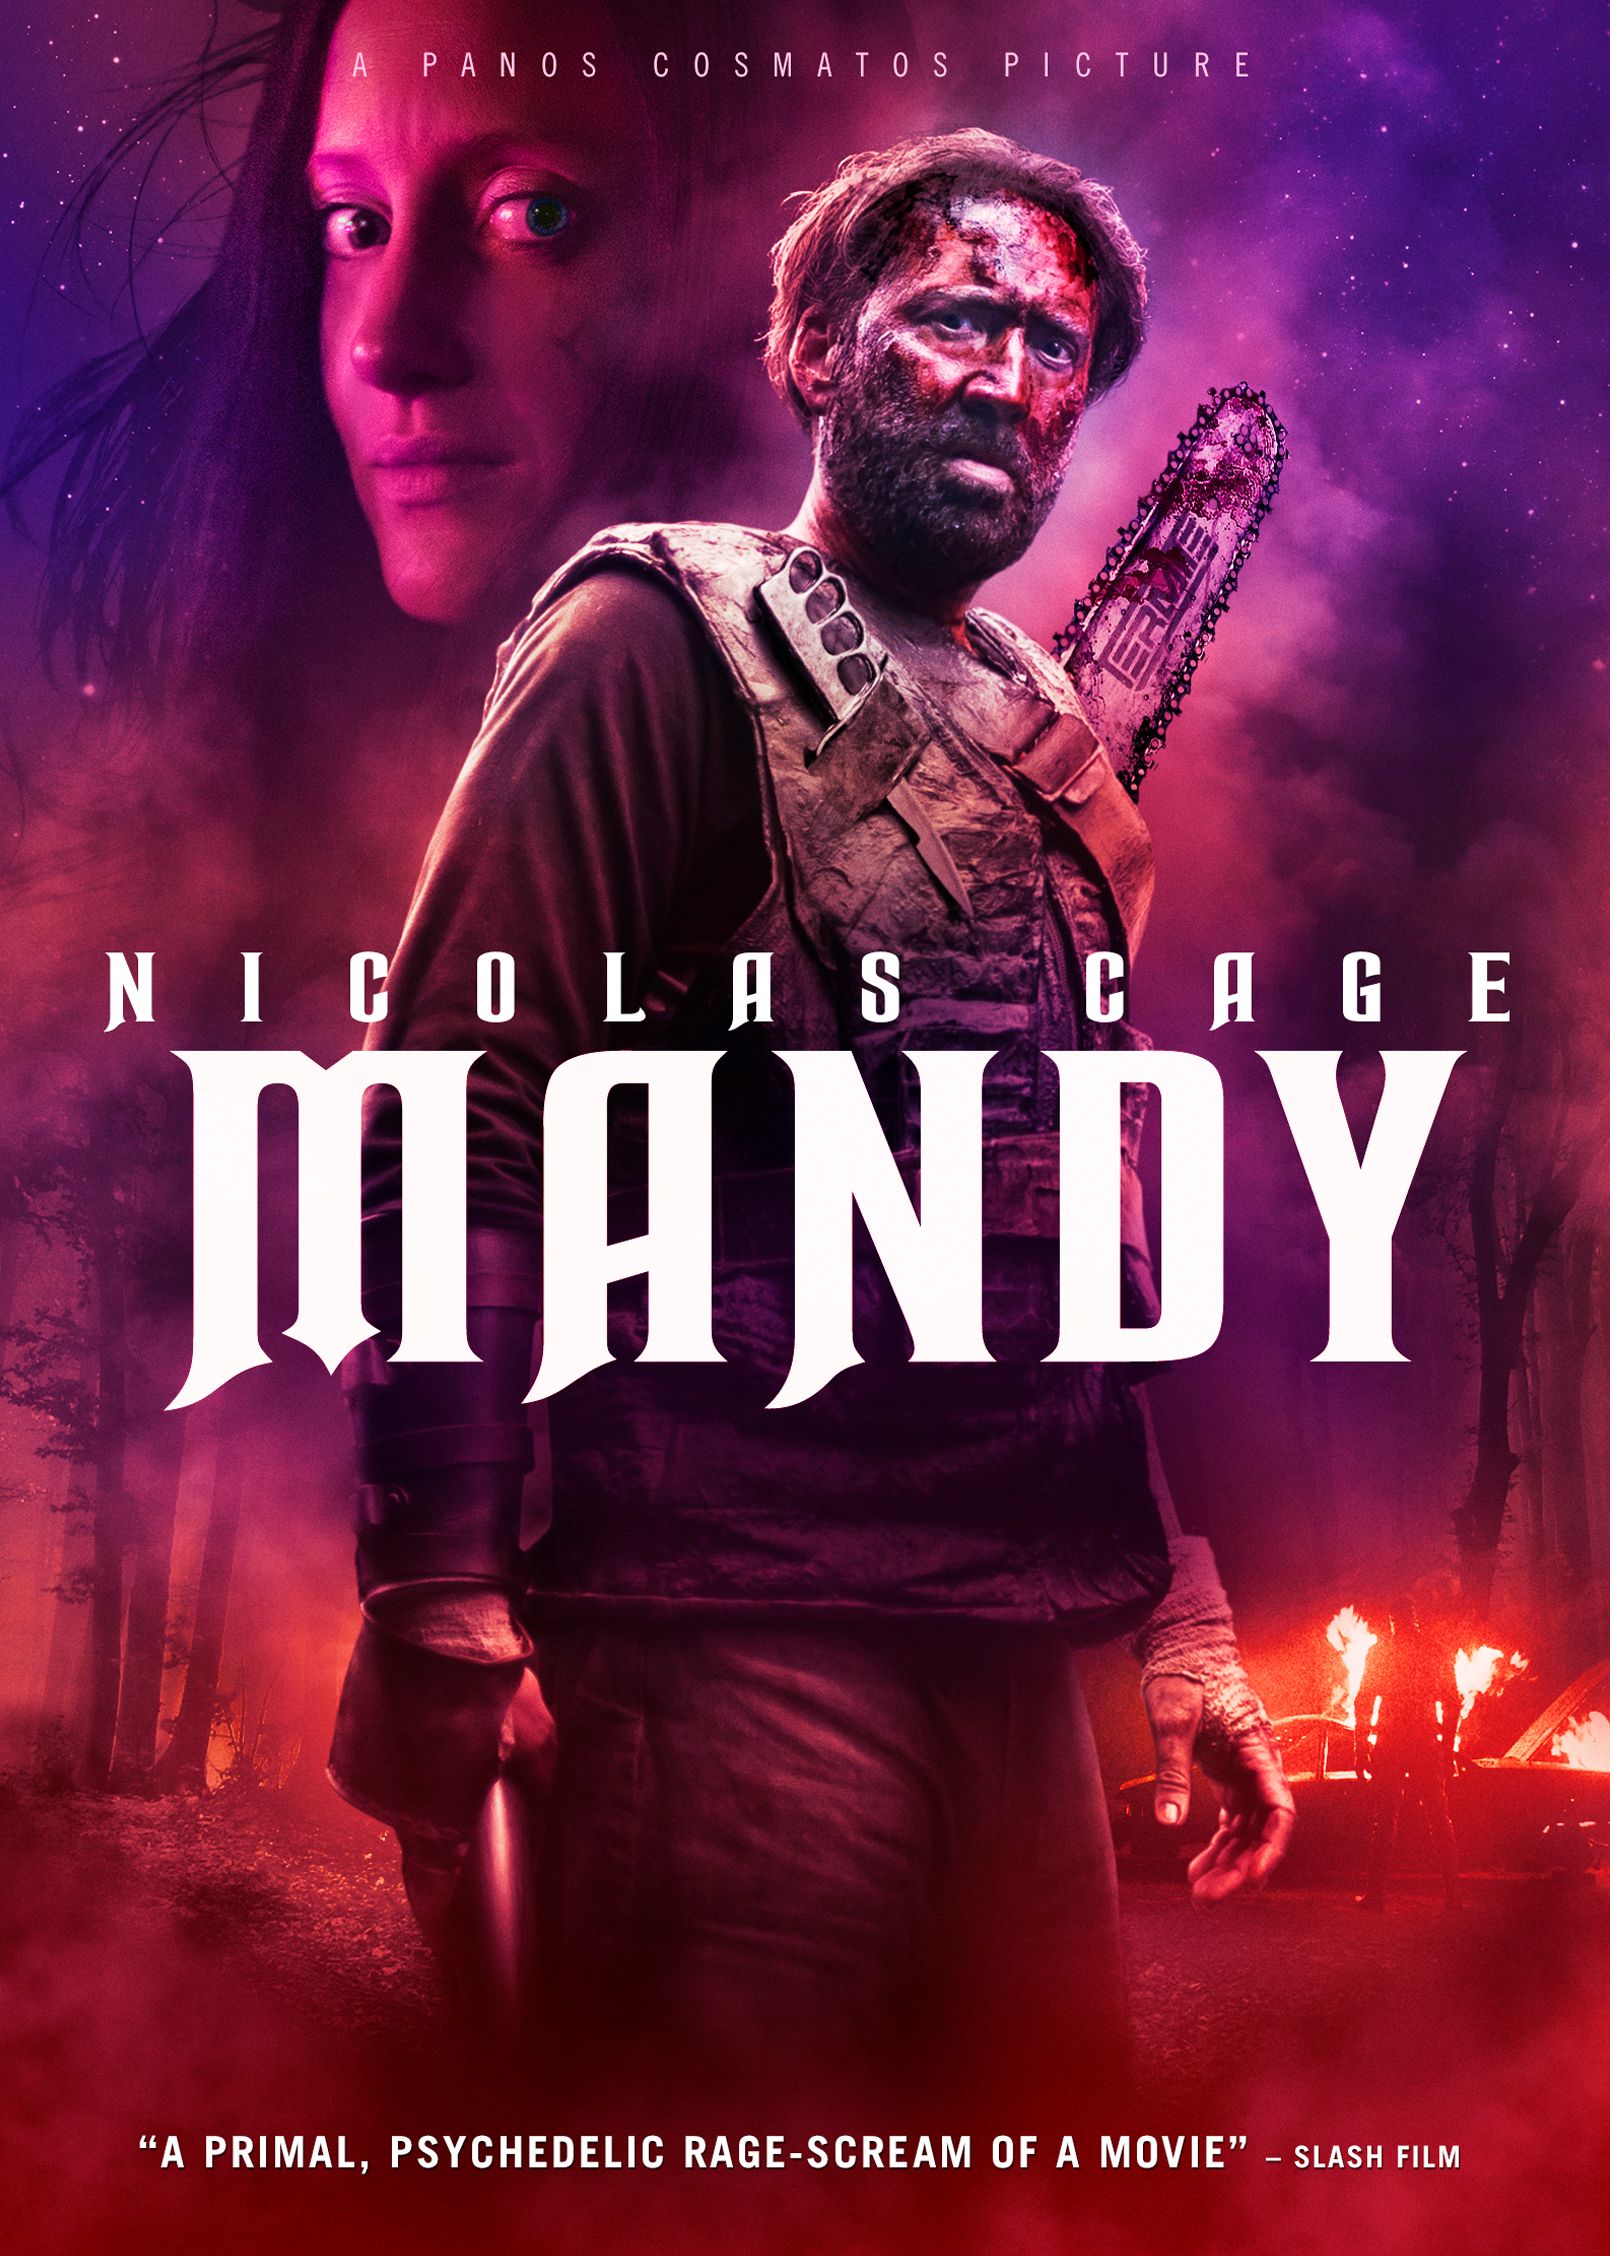 Mandy Blu-ray and DVD cover art